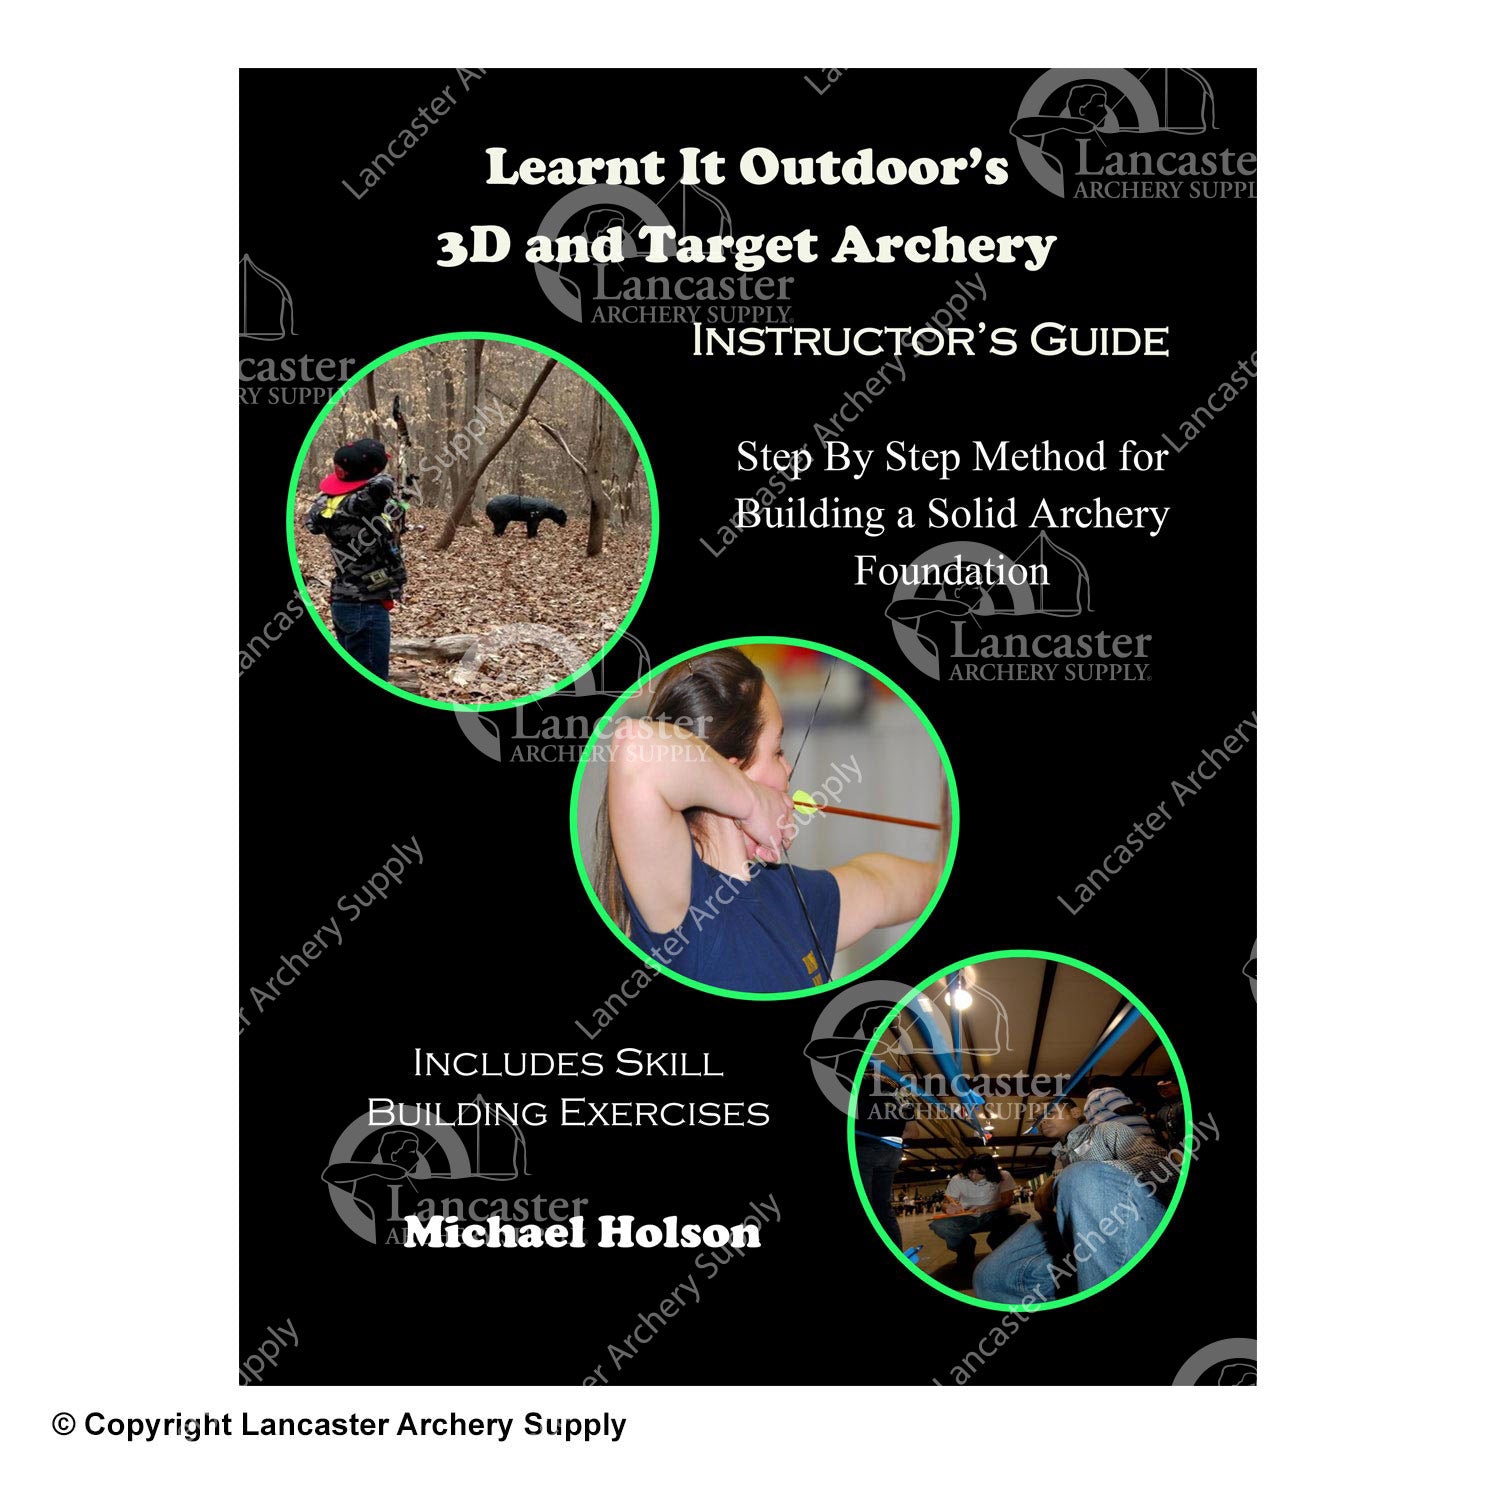 Learnt It Outdoor's 3D and Target Archery Instructor's Guide by Mike Holson